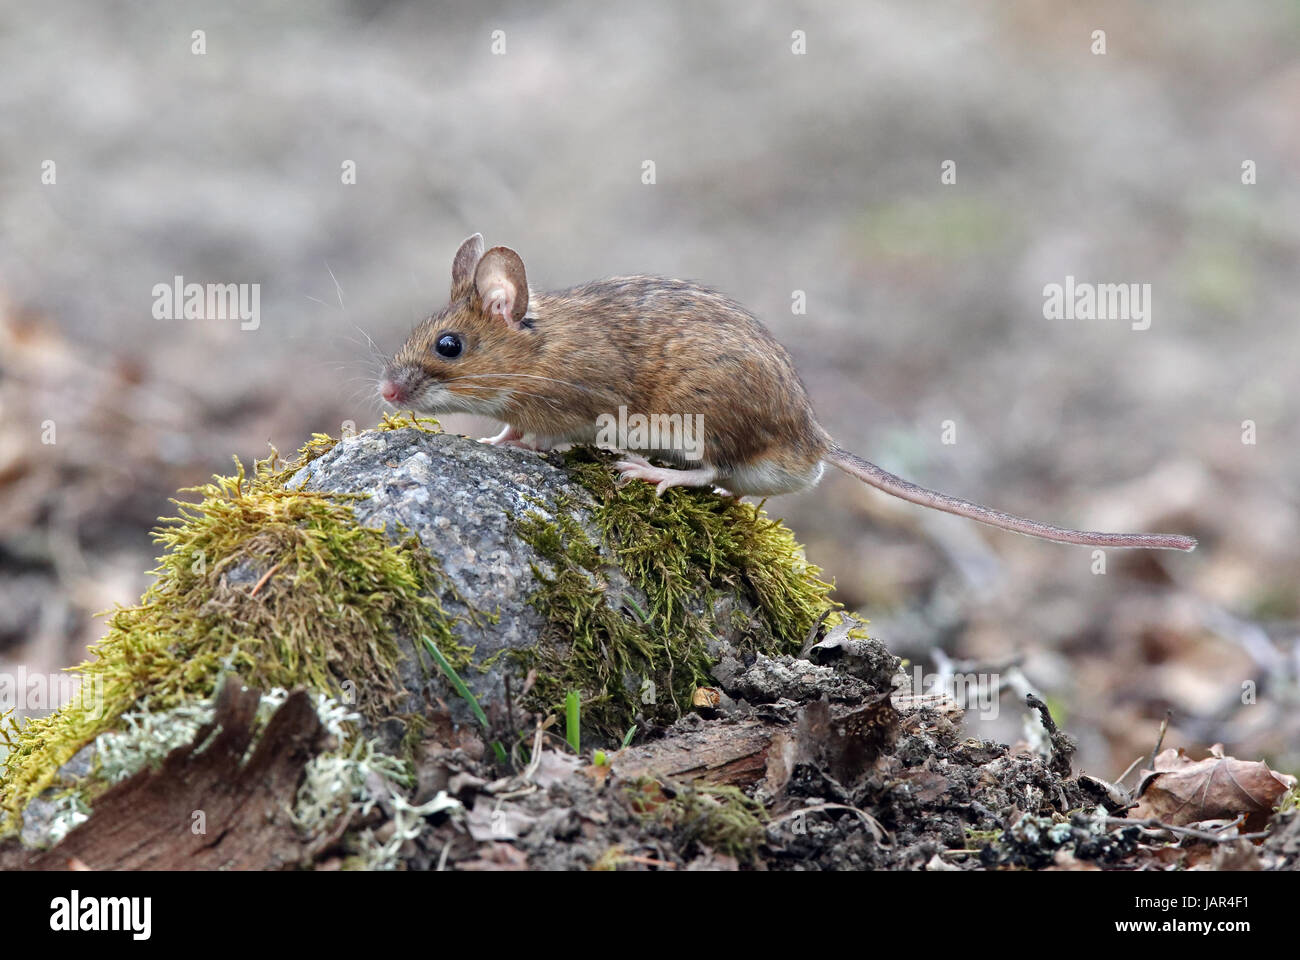 Yellow-necked mouse, Wild mouse, side wiew on a stone Stock Photo